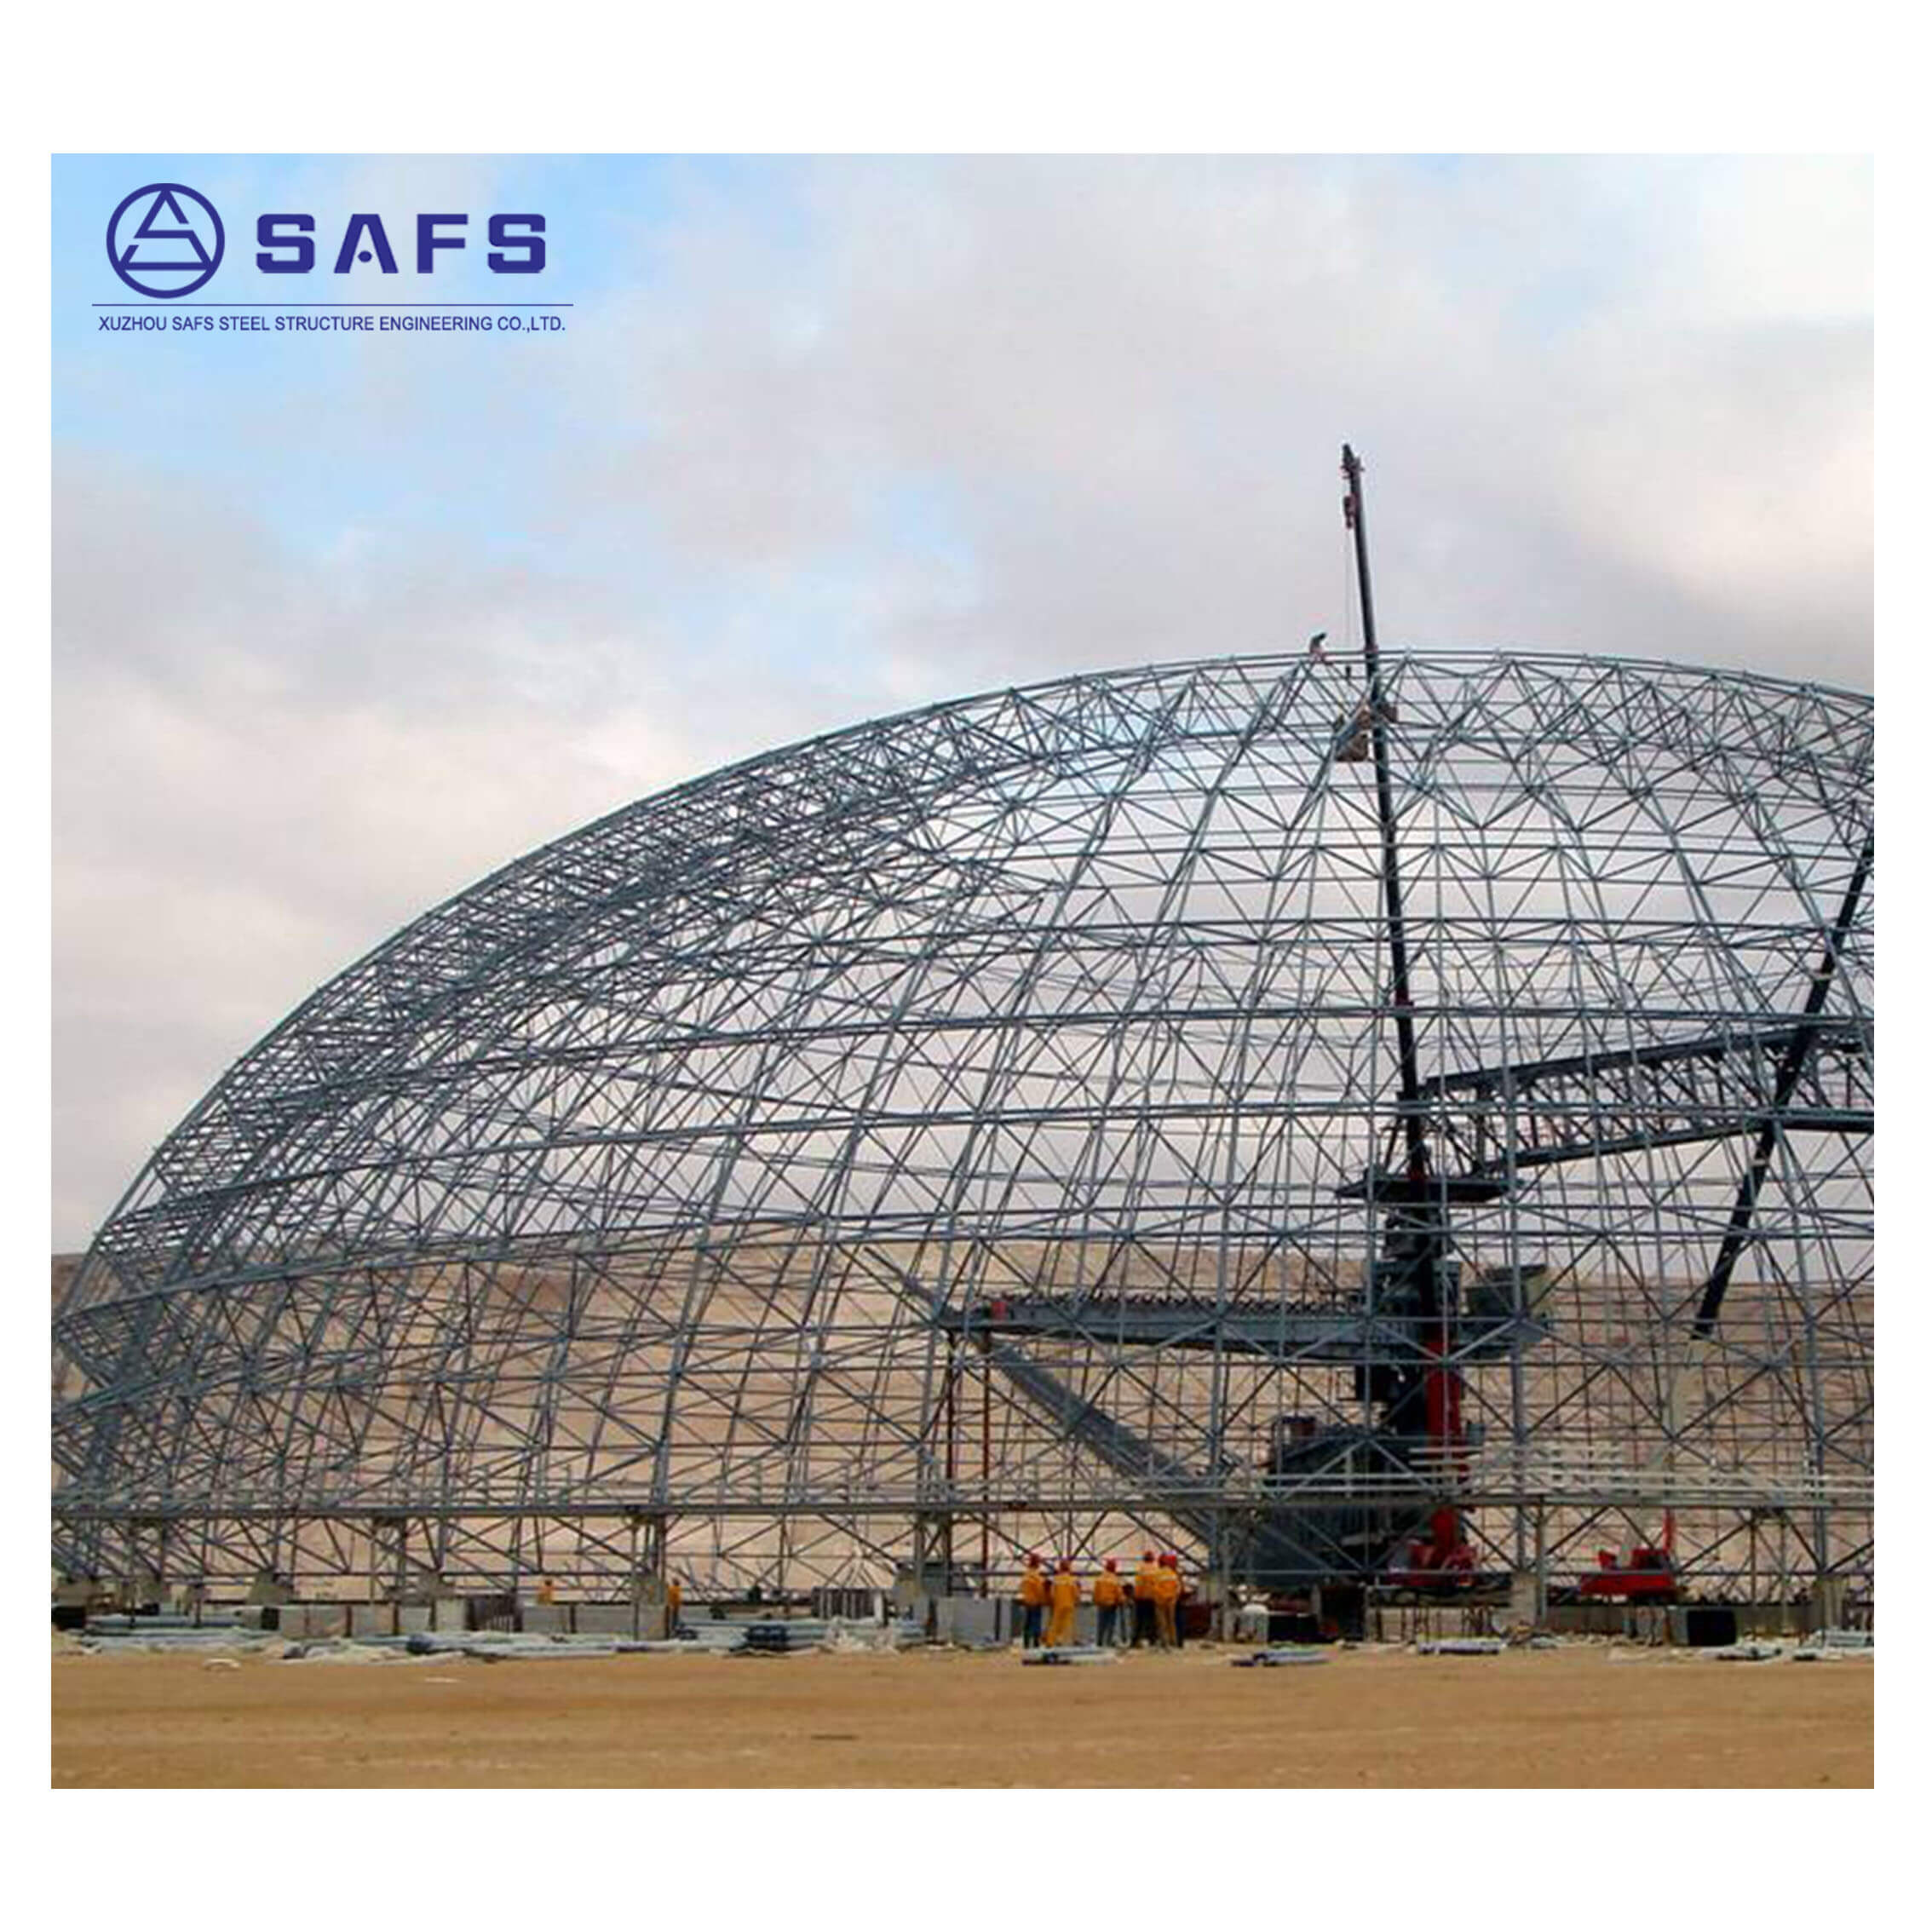 The difference between a steel structure and a space frame